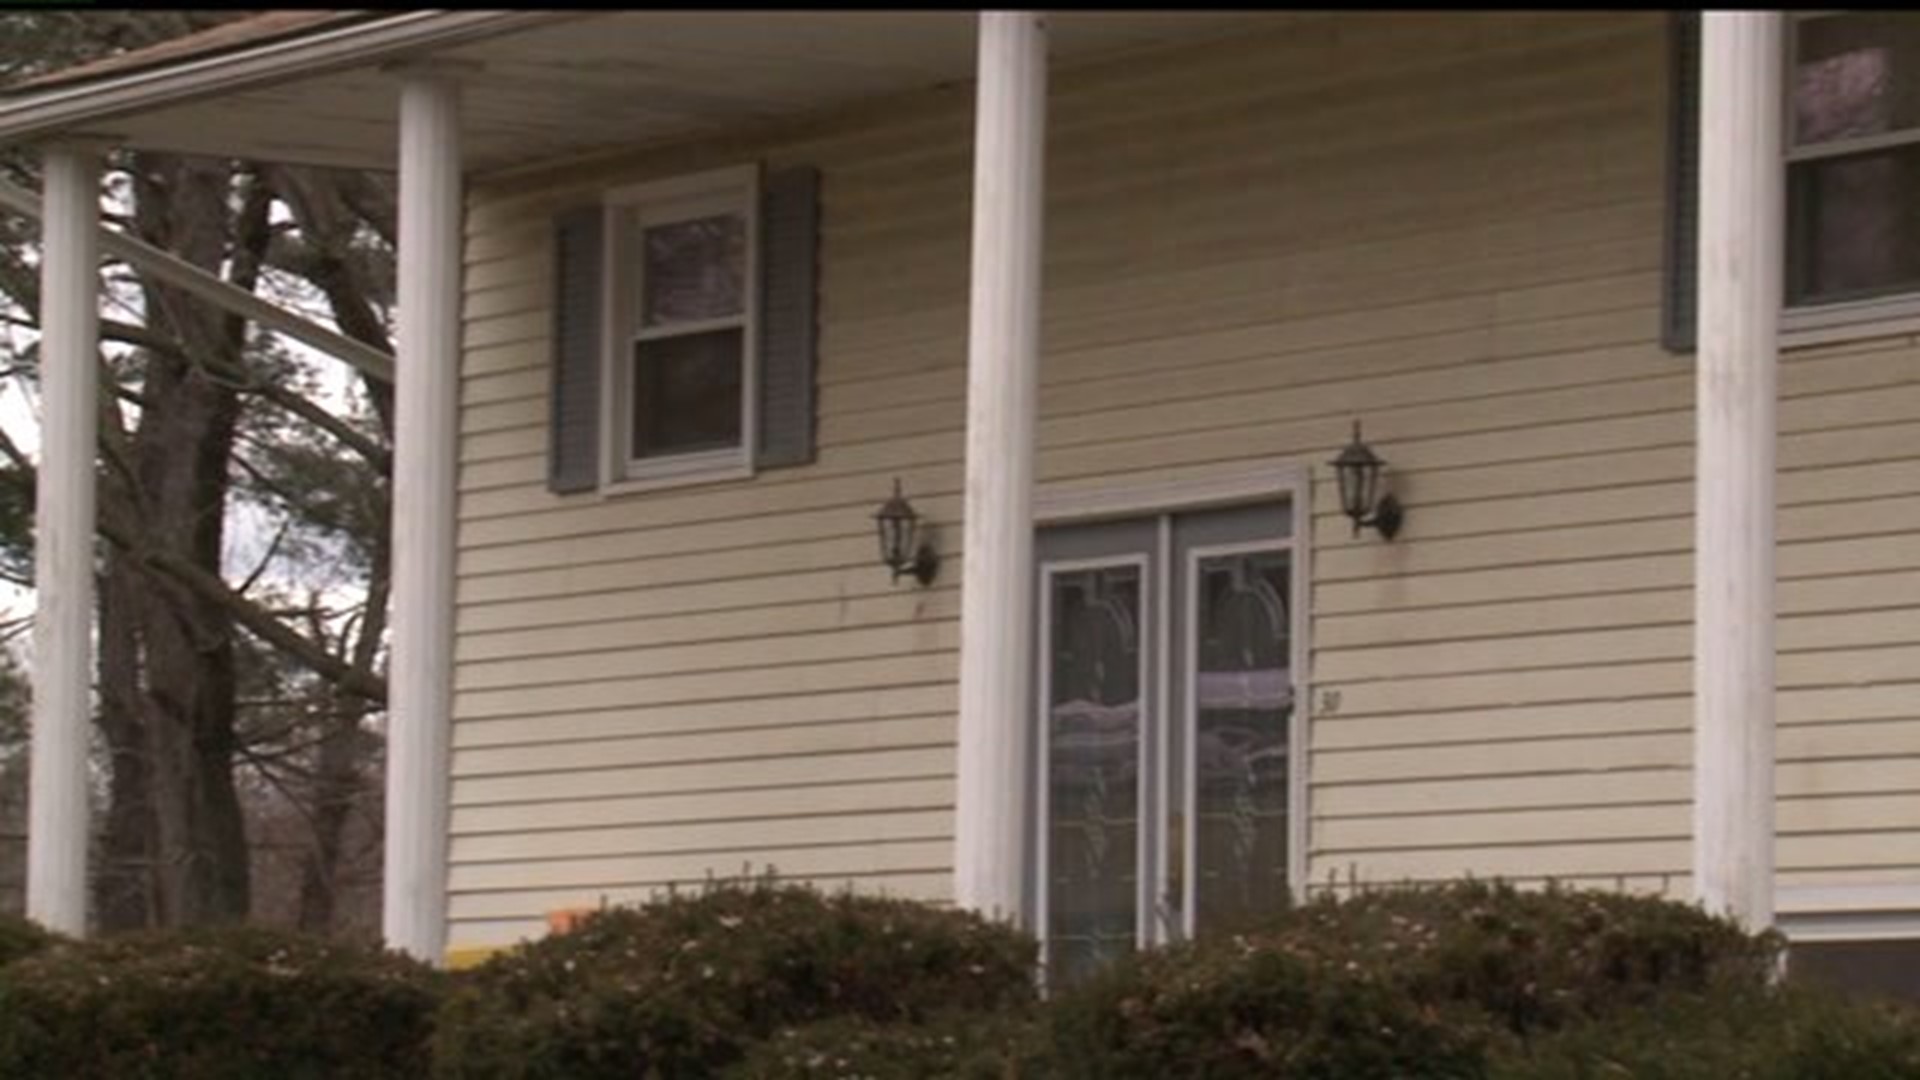 Police Investigating After Couple is Found Dead in Their York County Home